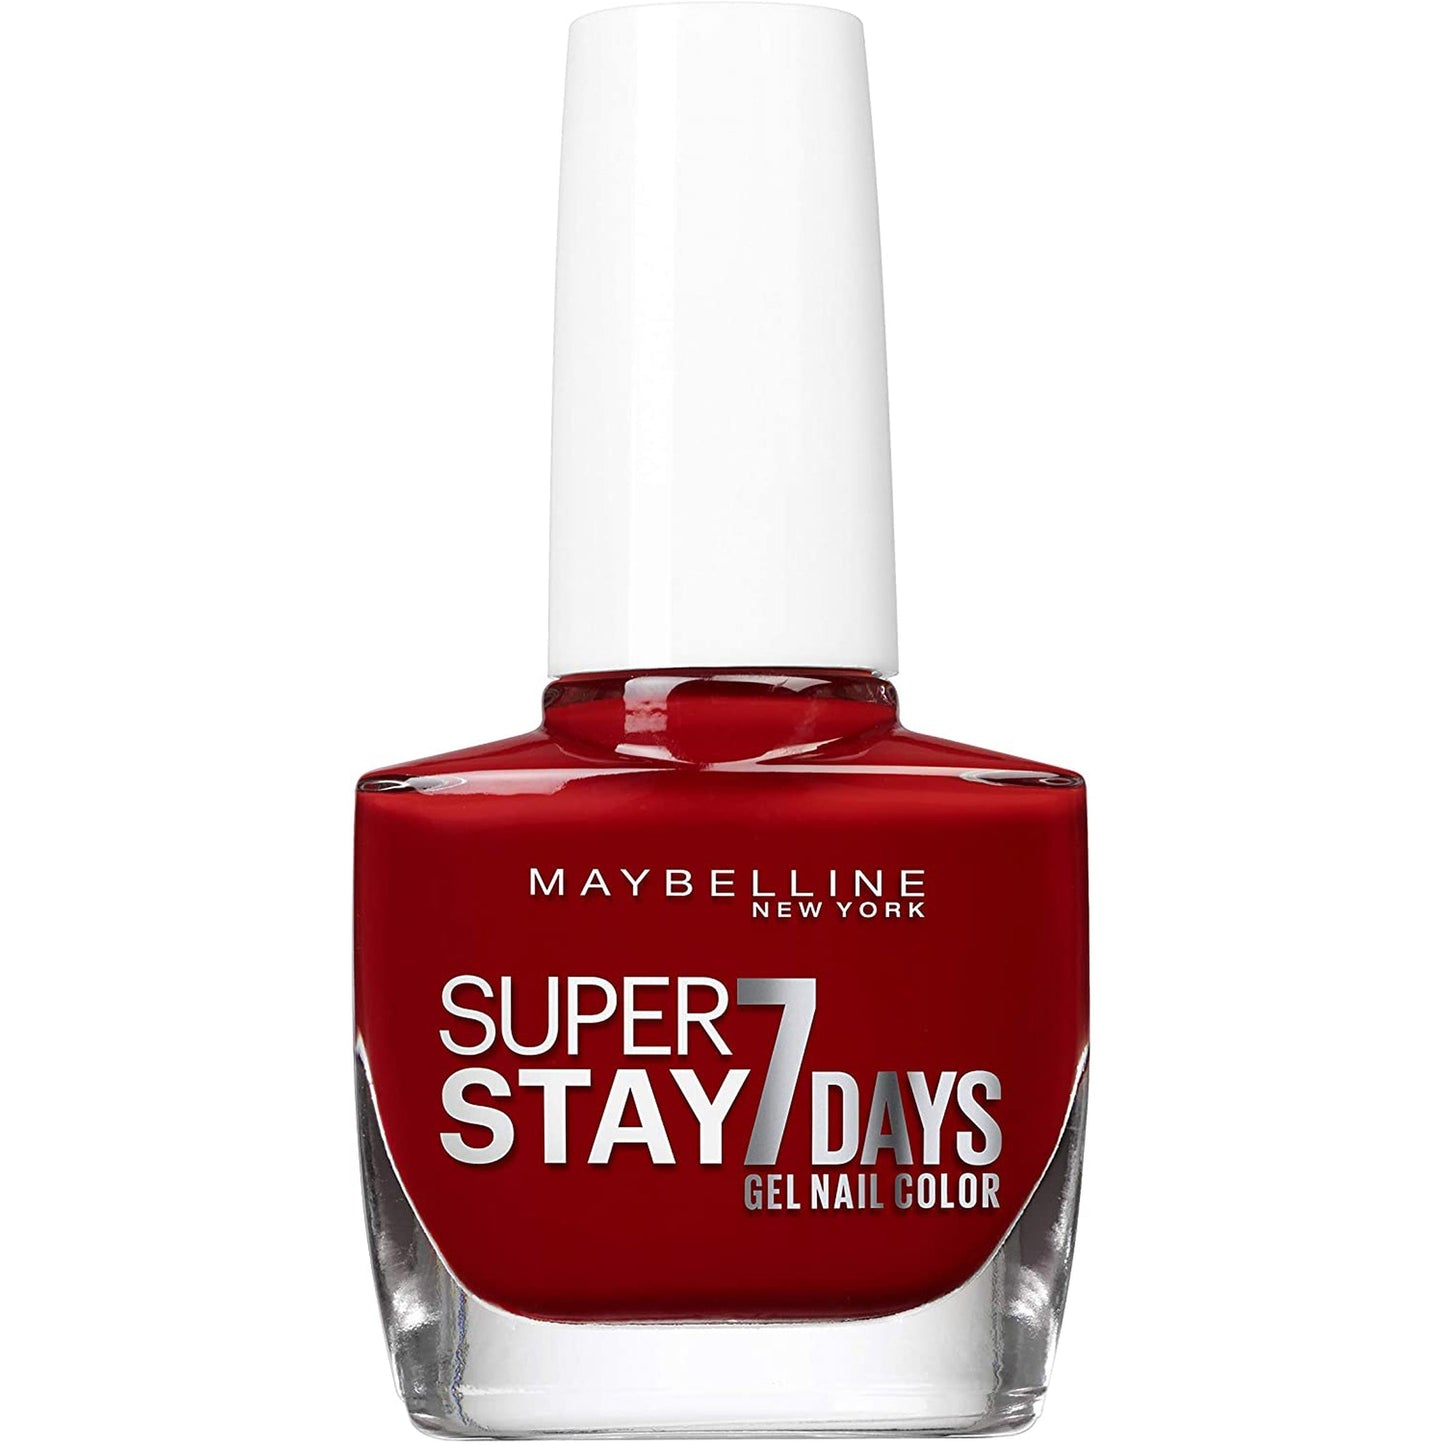 Maybelline Super Stay 7 Days Gel Nail Polish 06 Deep Red-Maybelline-BeautyNmakeup.co.uk